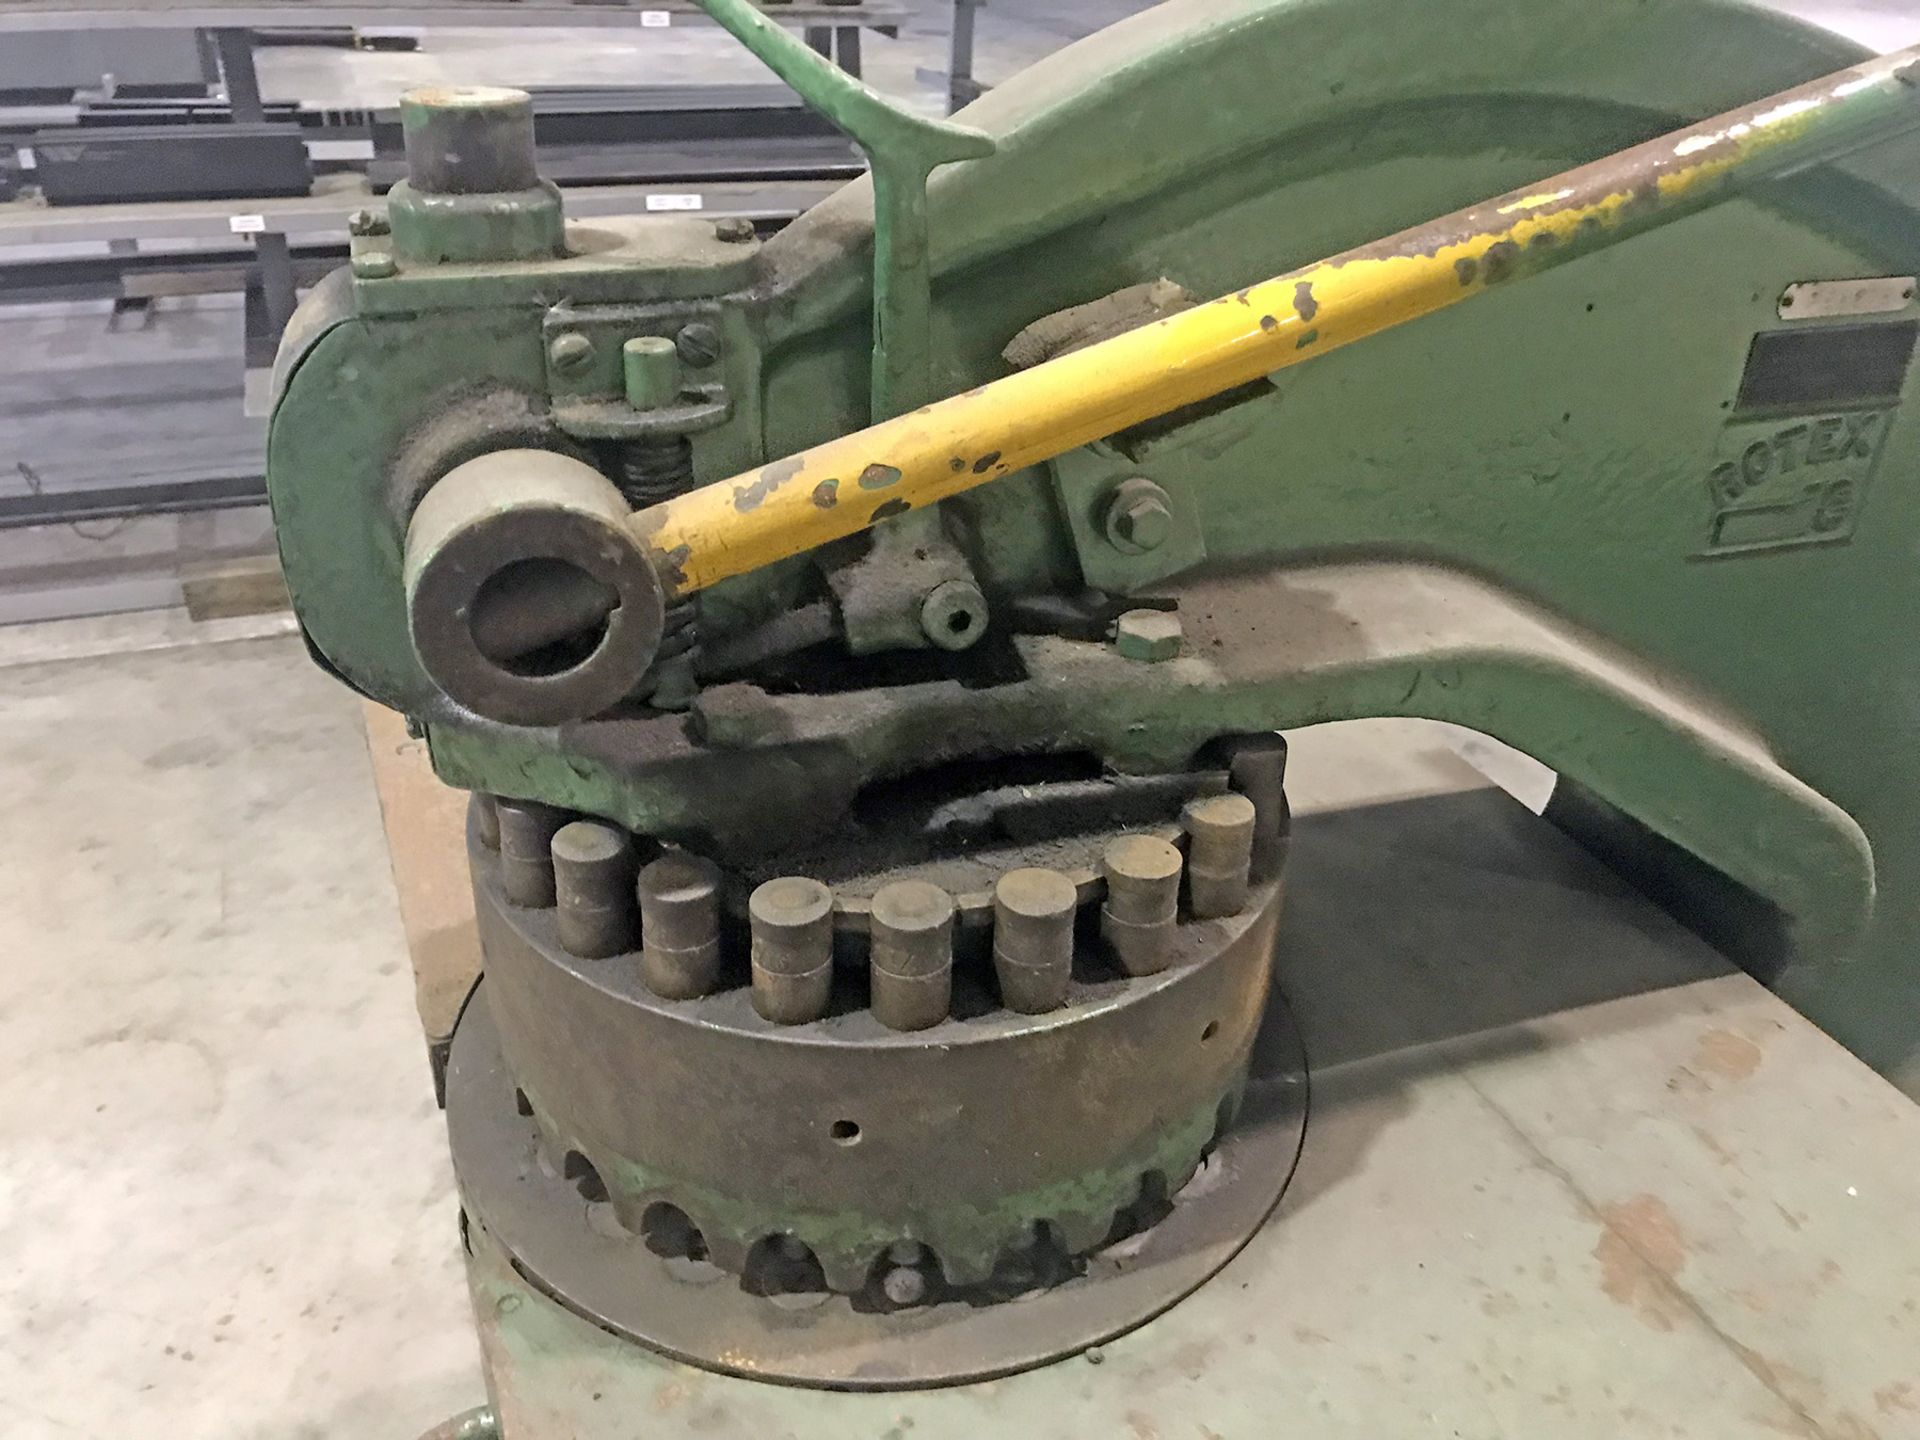 Rotex Model 18A52 Turret Punch Press - Image 6 of 8